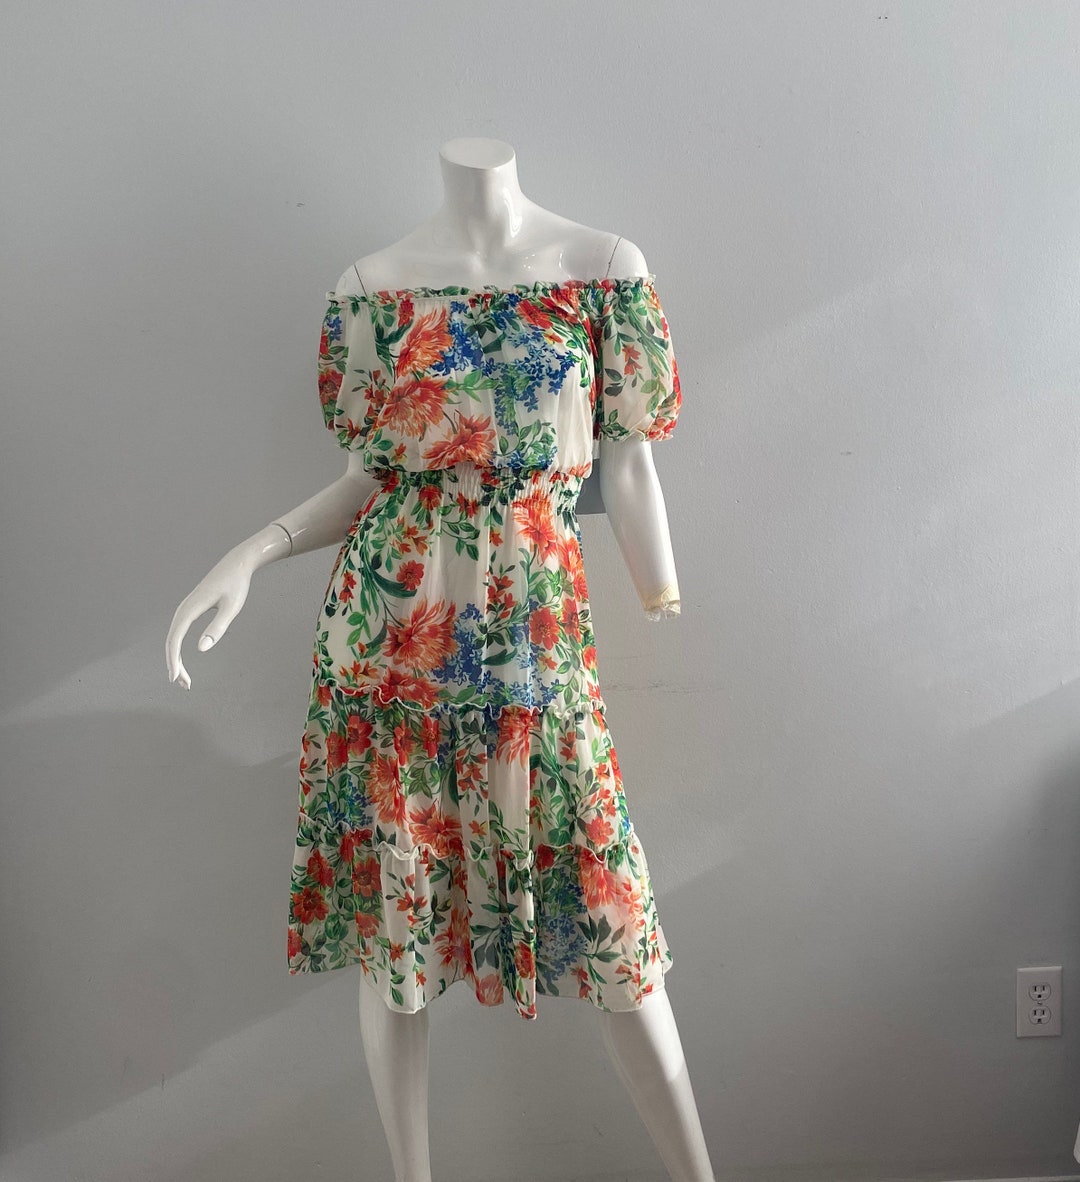 Kate-lilly 90s Style Floral Inspired Dress Size 8 - Etsy